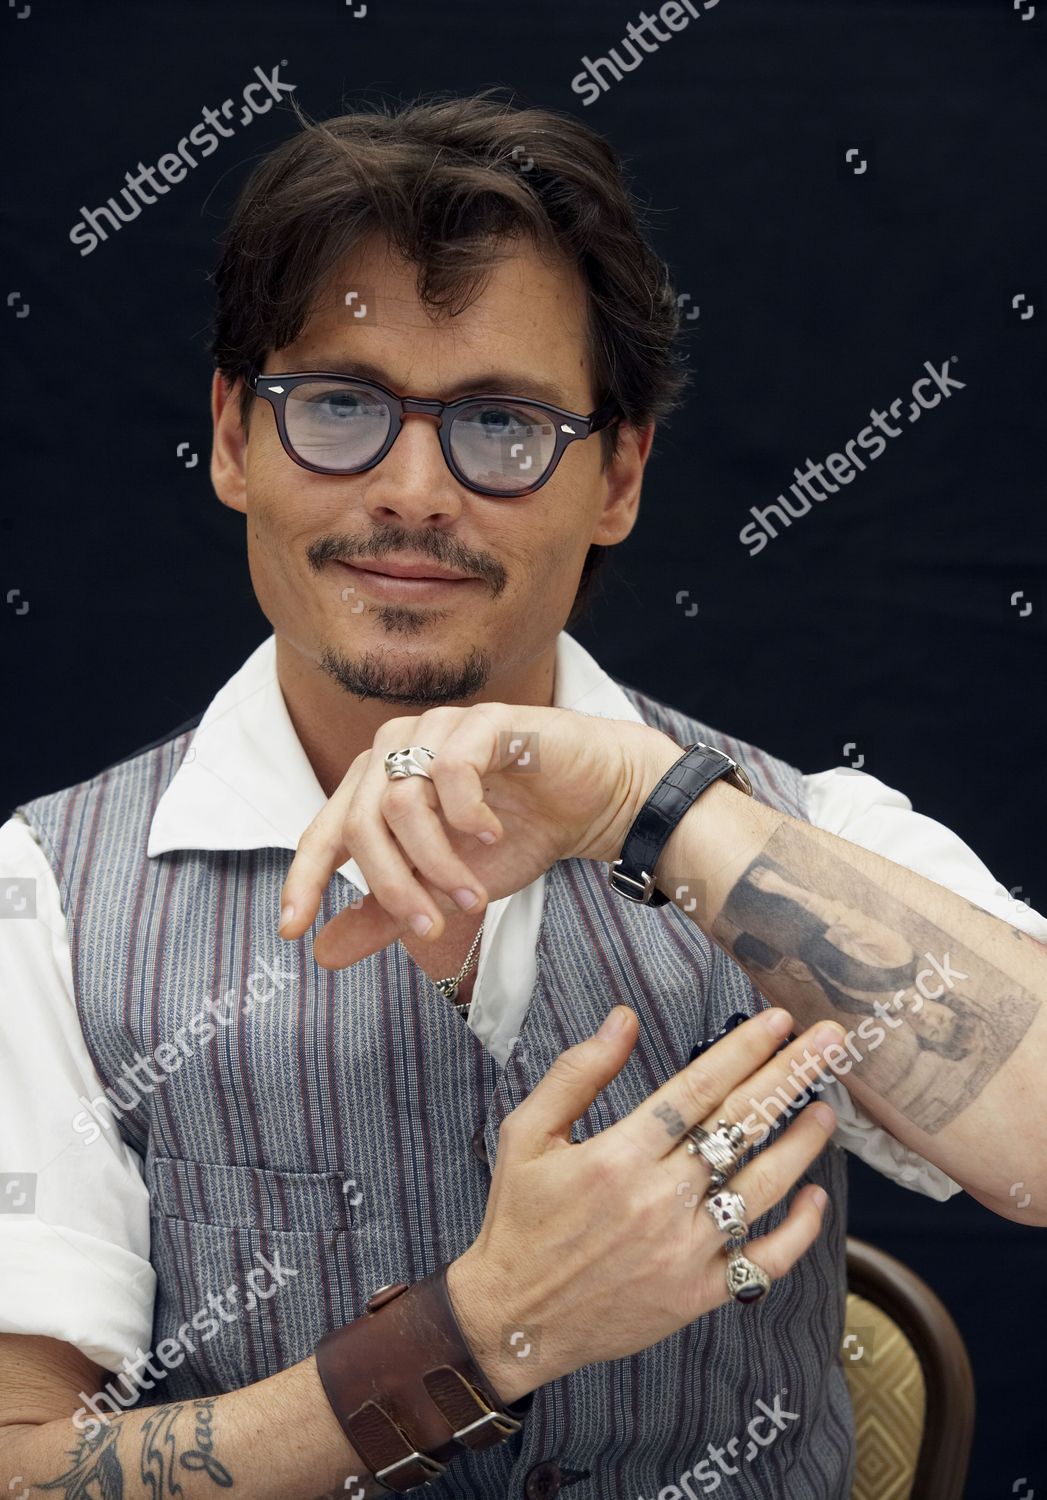 Johnny Depp Displaying His Tattoos Editorial Stock Photo  Stock Image   Shutterstock